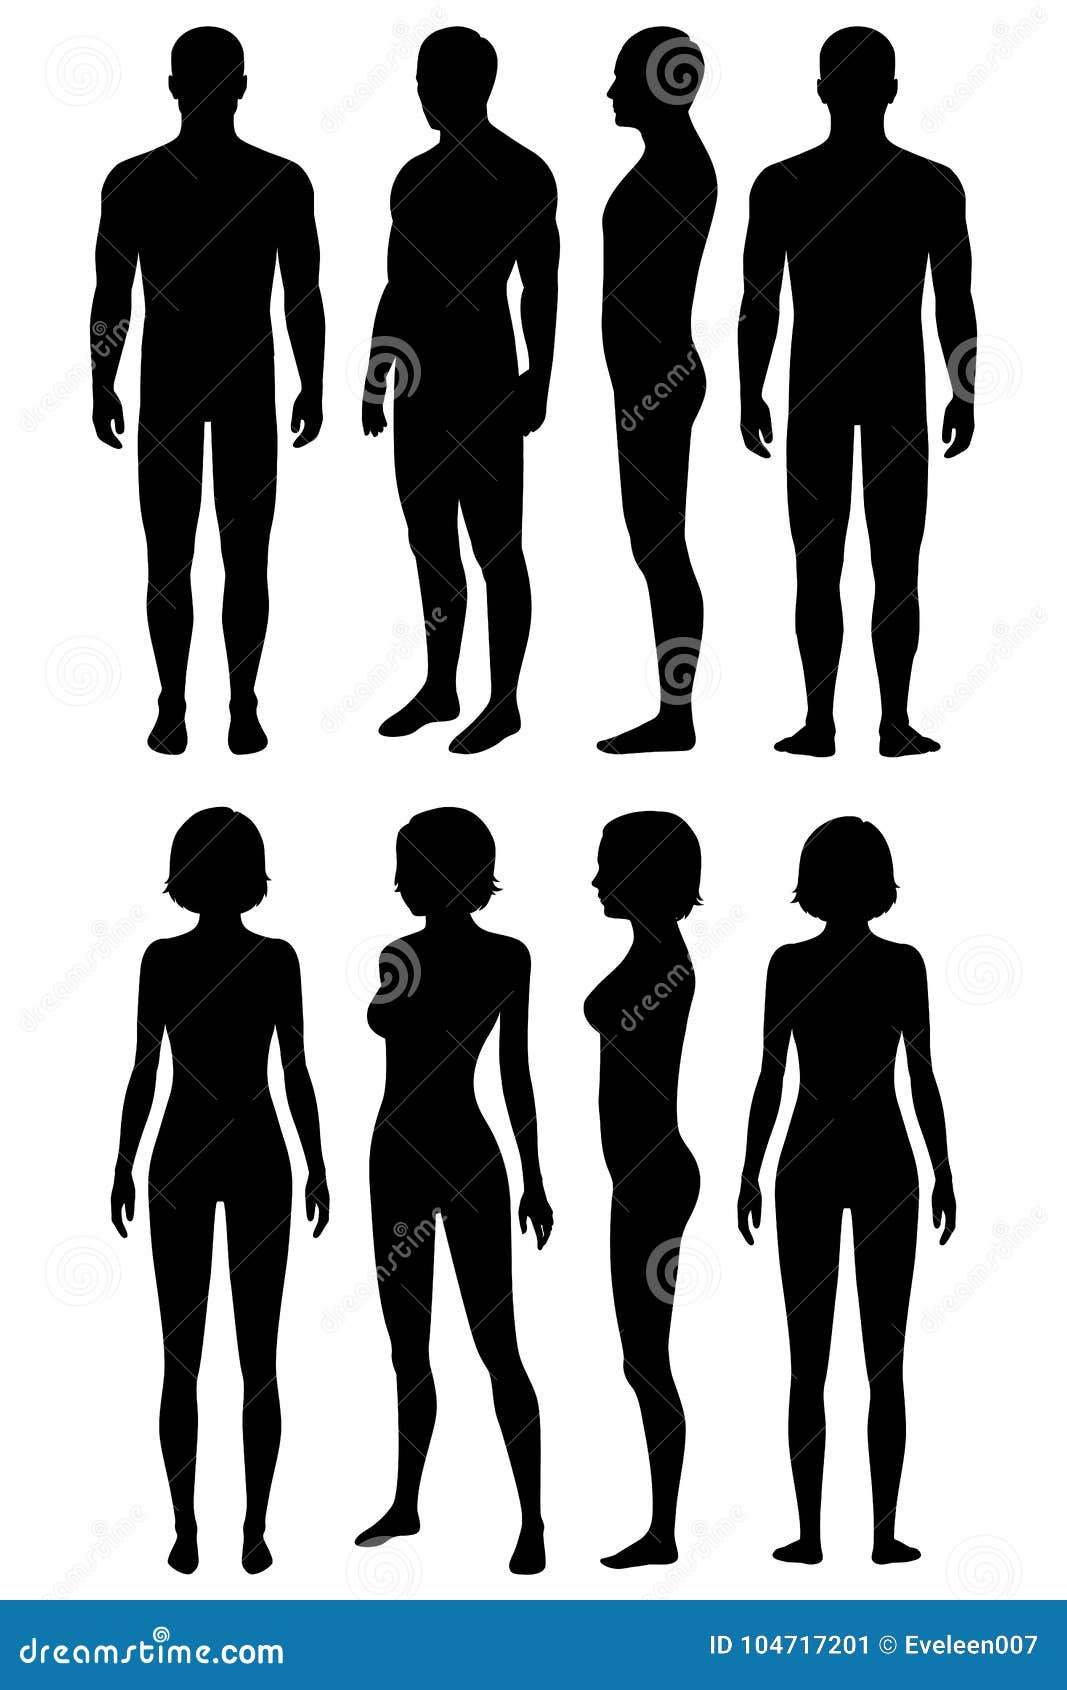 Body Cartoons, Illustrations & Vector Stock Images - 835024 Pictures to